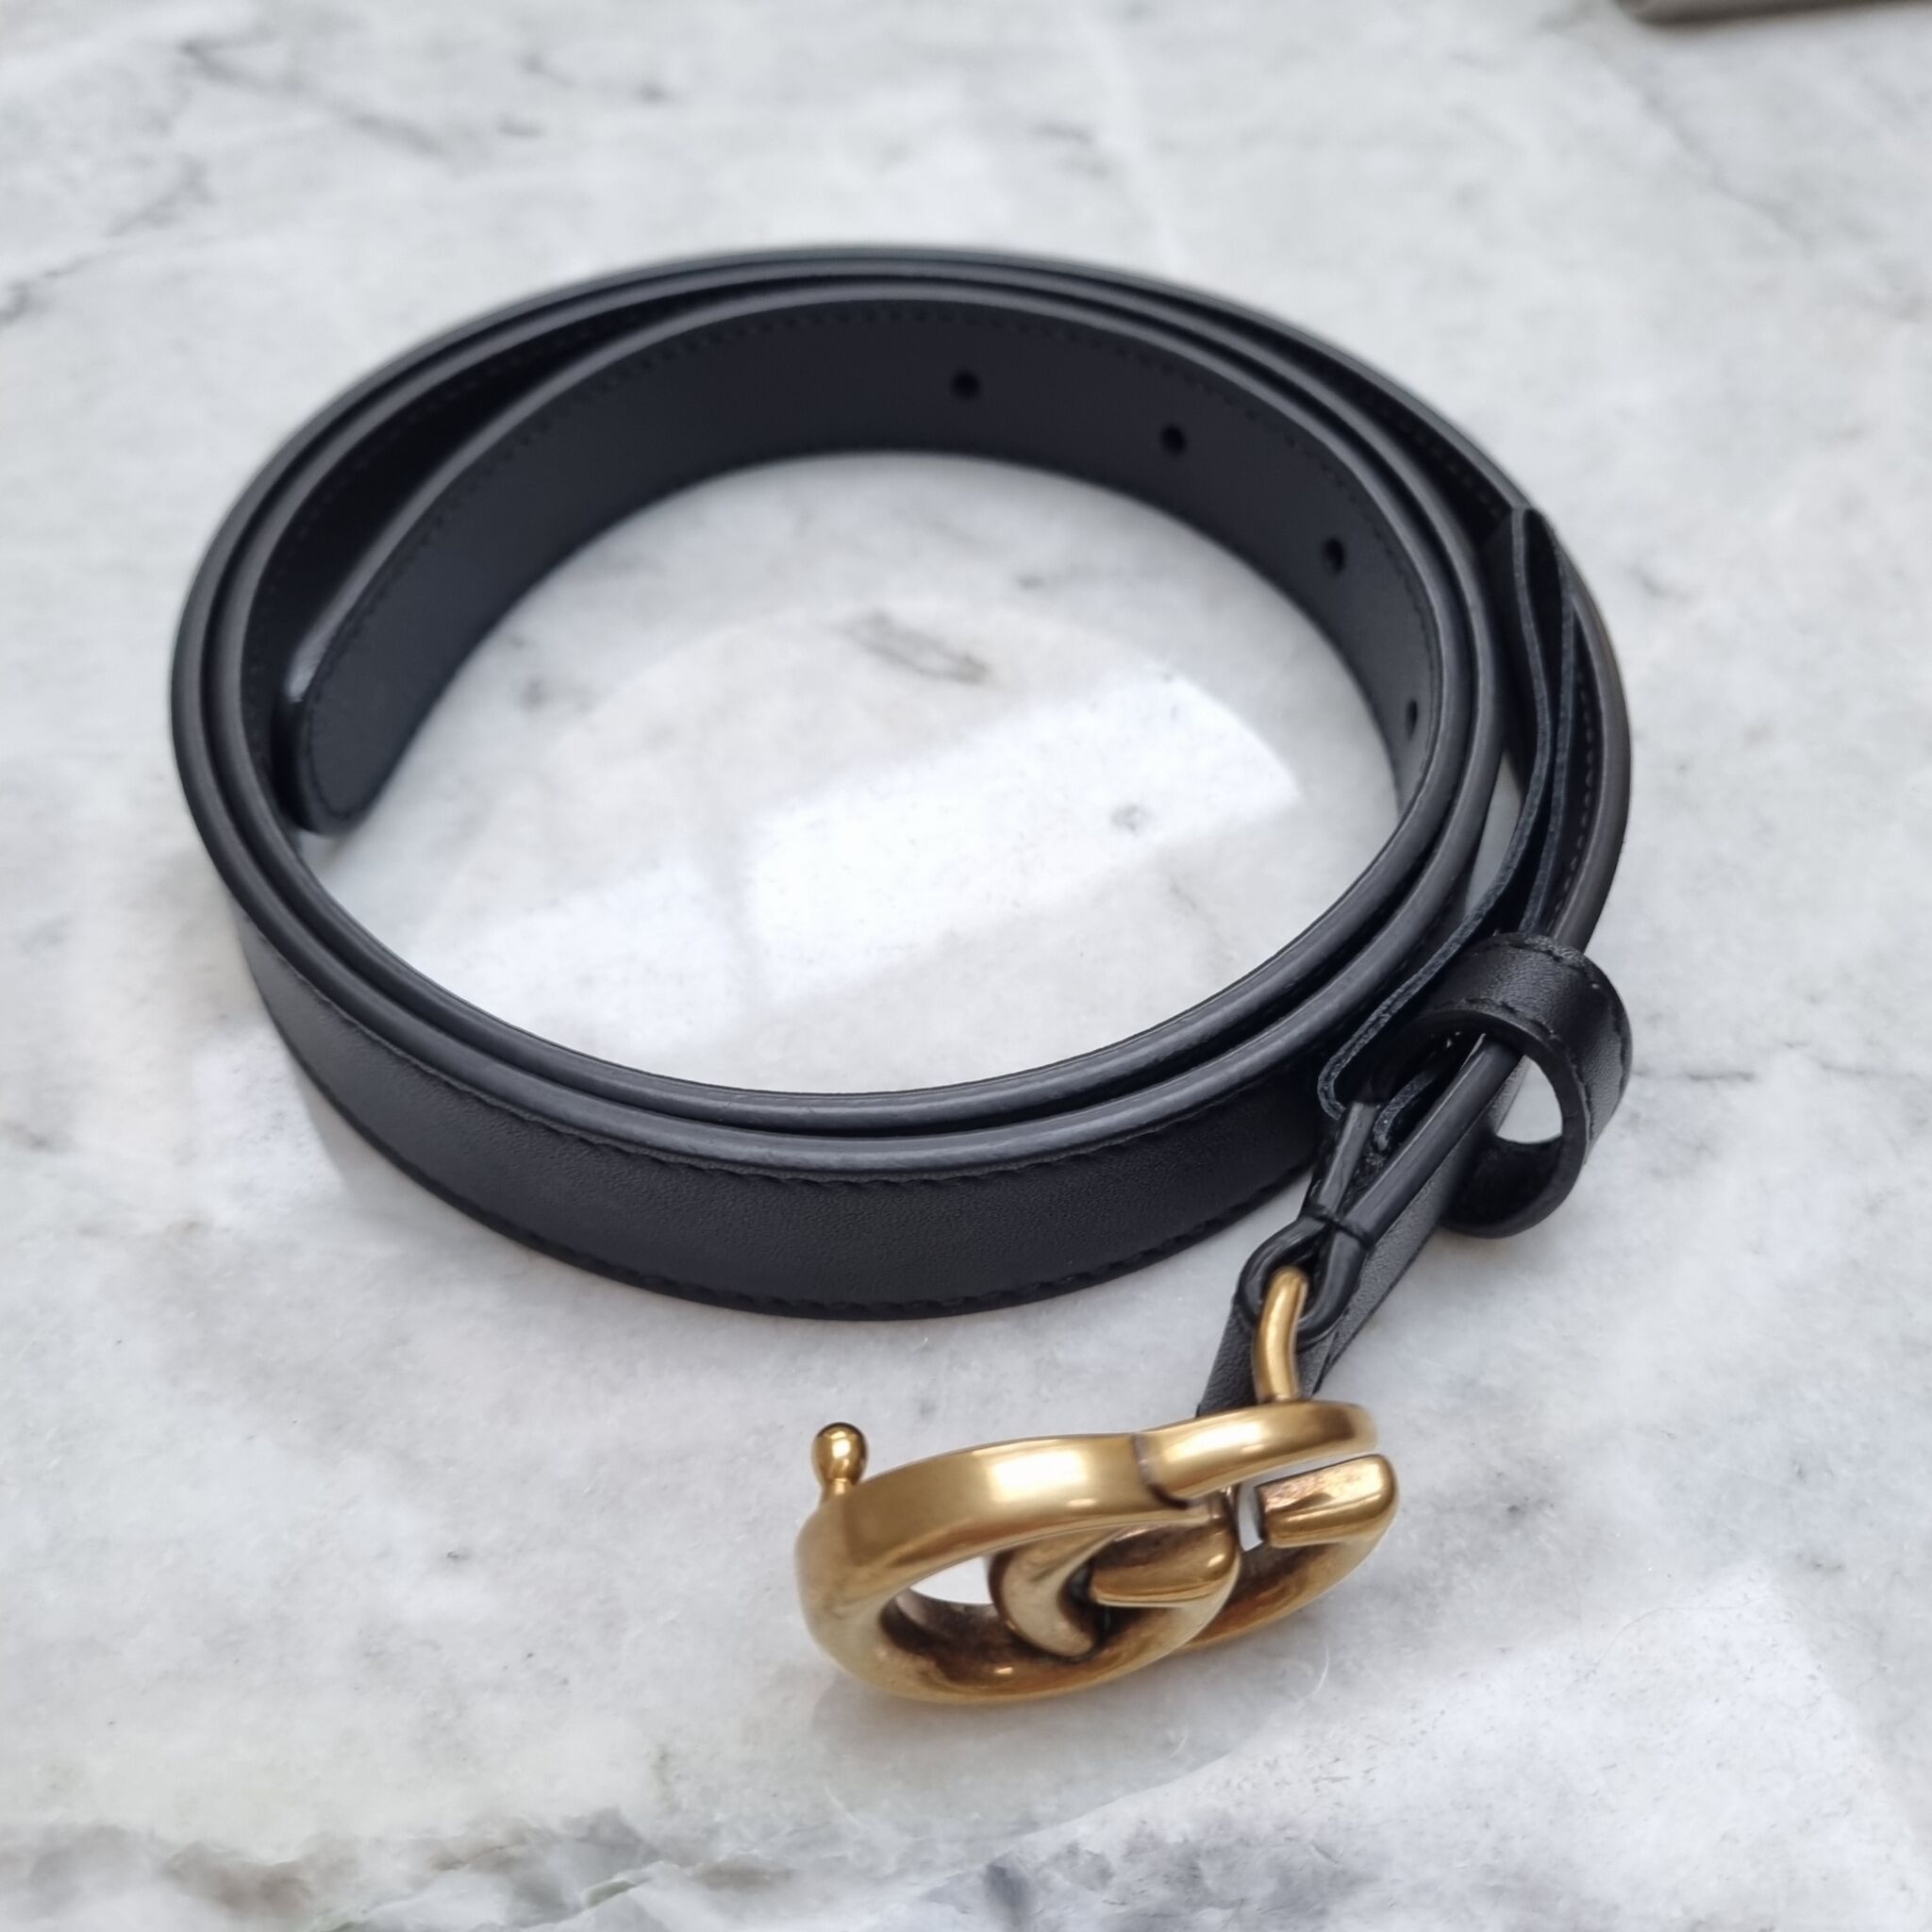 Gucci Belt With Double G Buckle, 85 Laulay Luxury